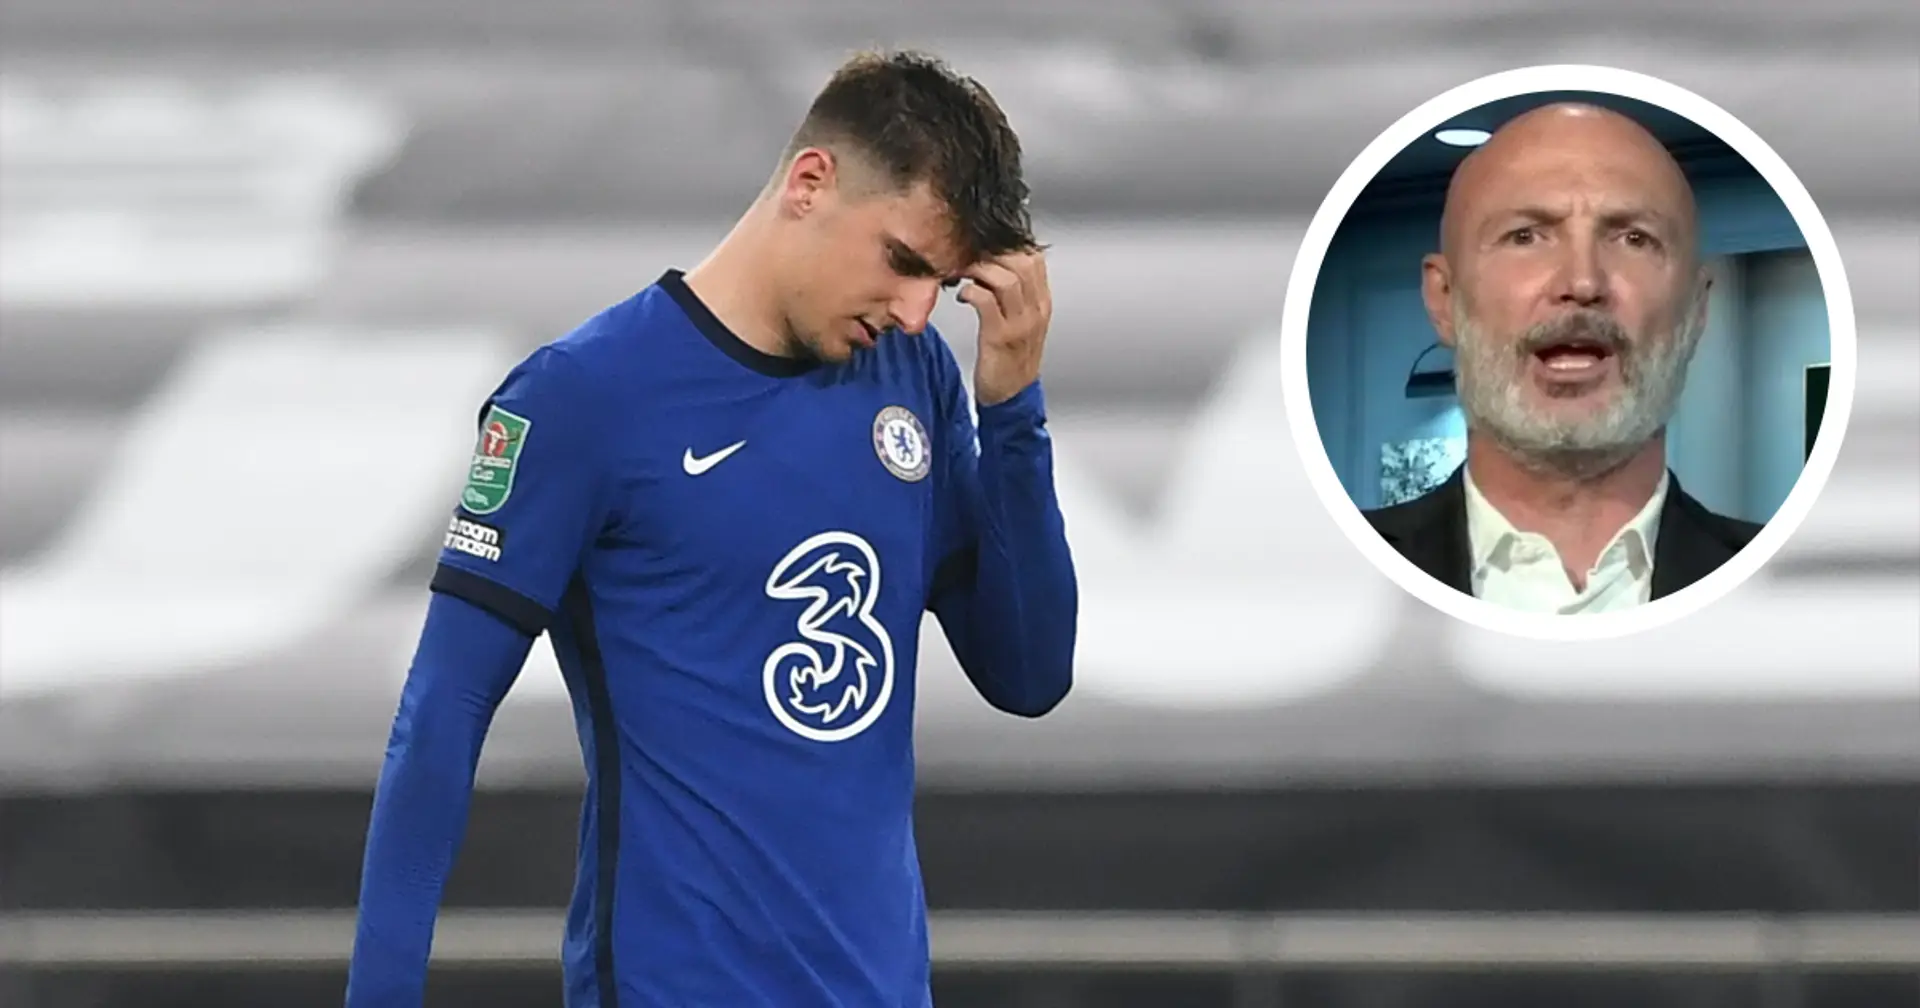 'Some players have to wake up if they want to have a career': Frank Lebouef sends stark warning to Mason Mount and other Chelsea underperformers